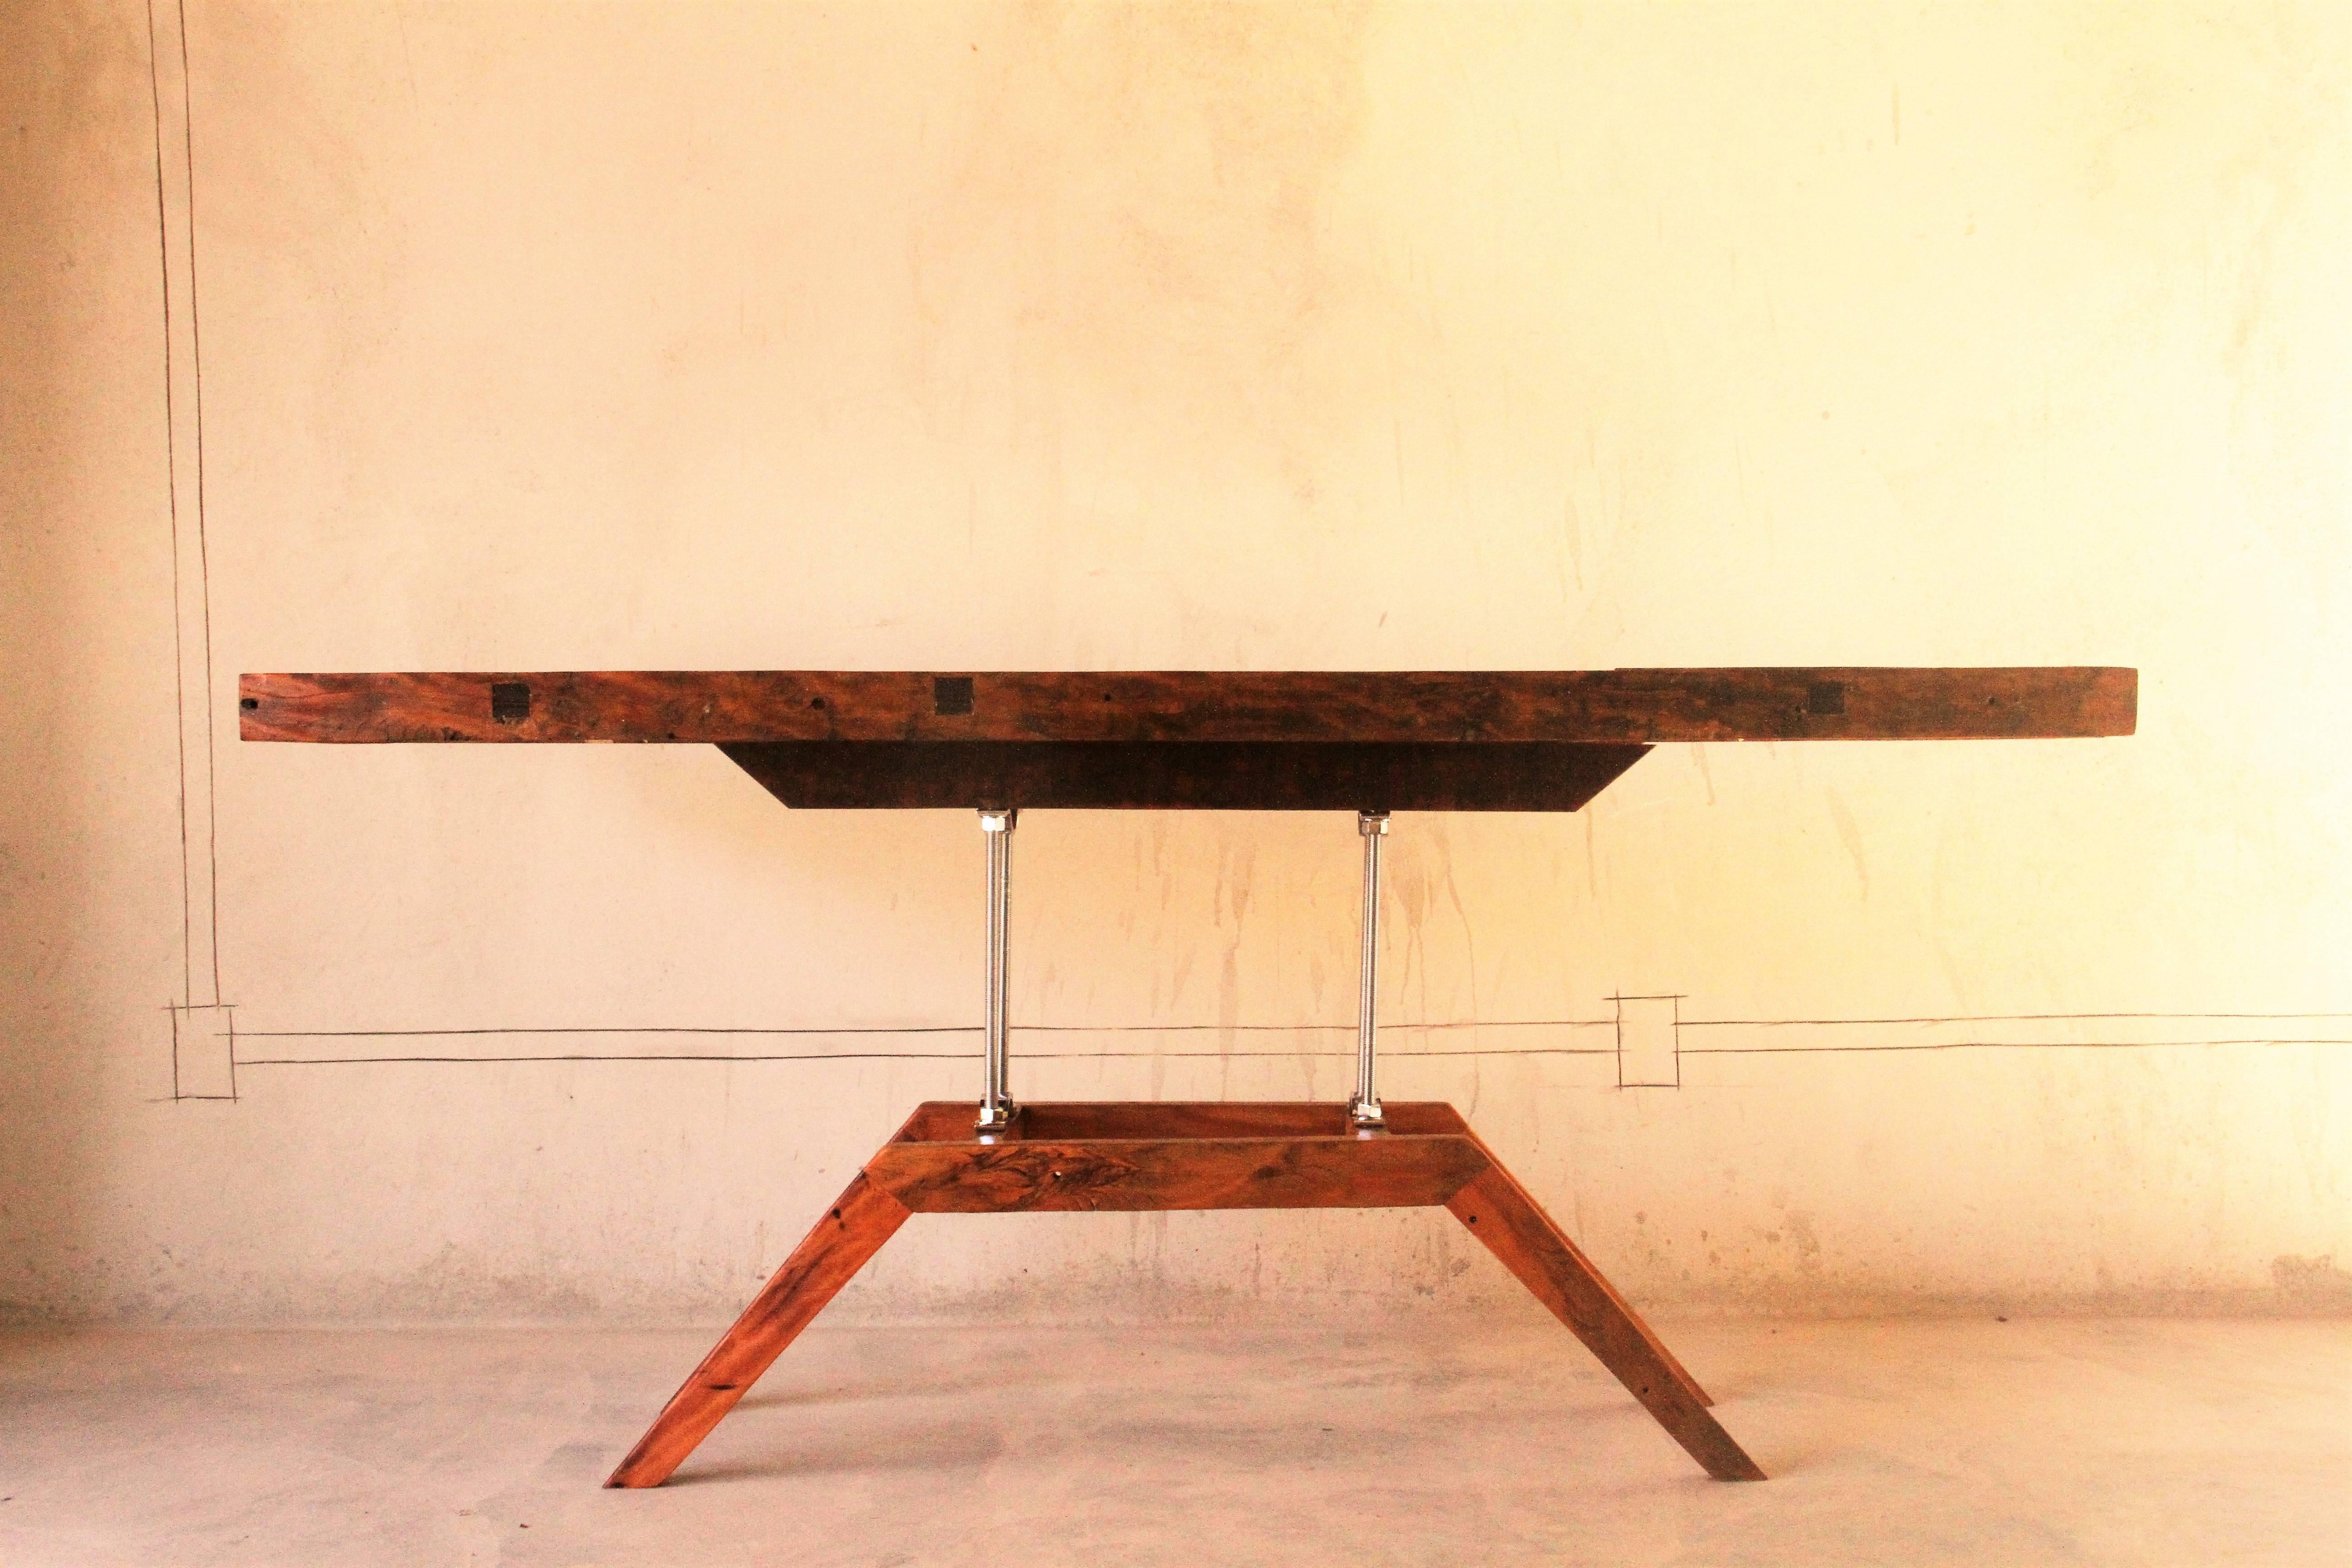 This modern Brazilian hardwood and steel console is a one of a kind piece, signed, made handmade by the artist. Named 